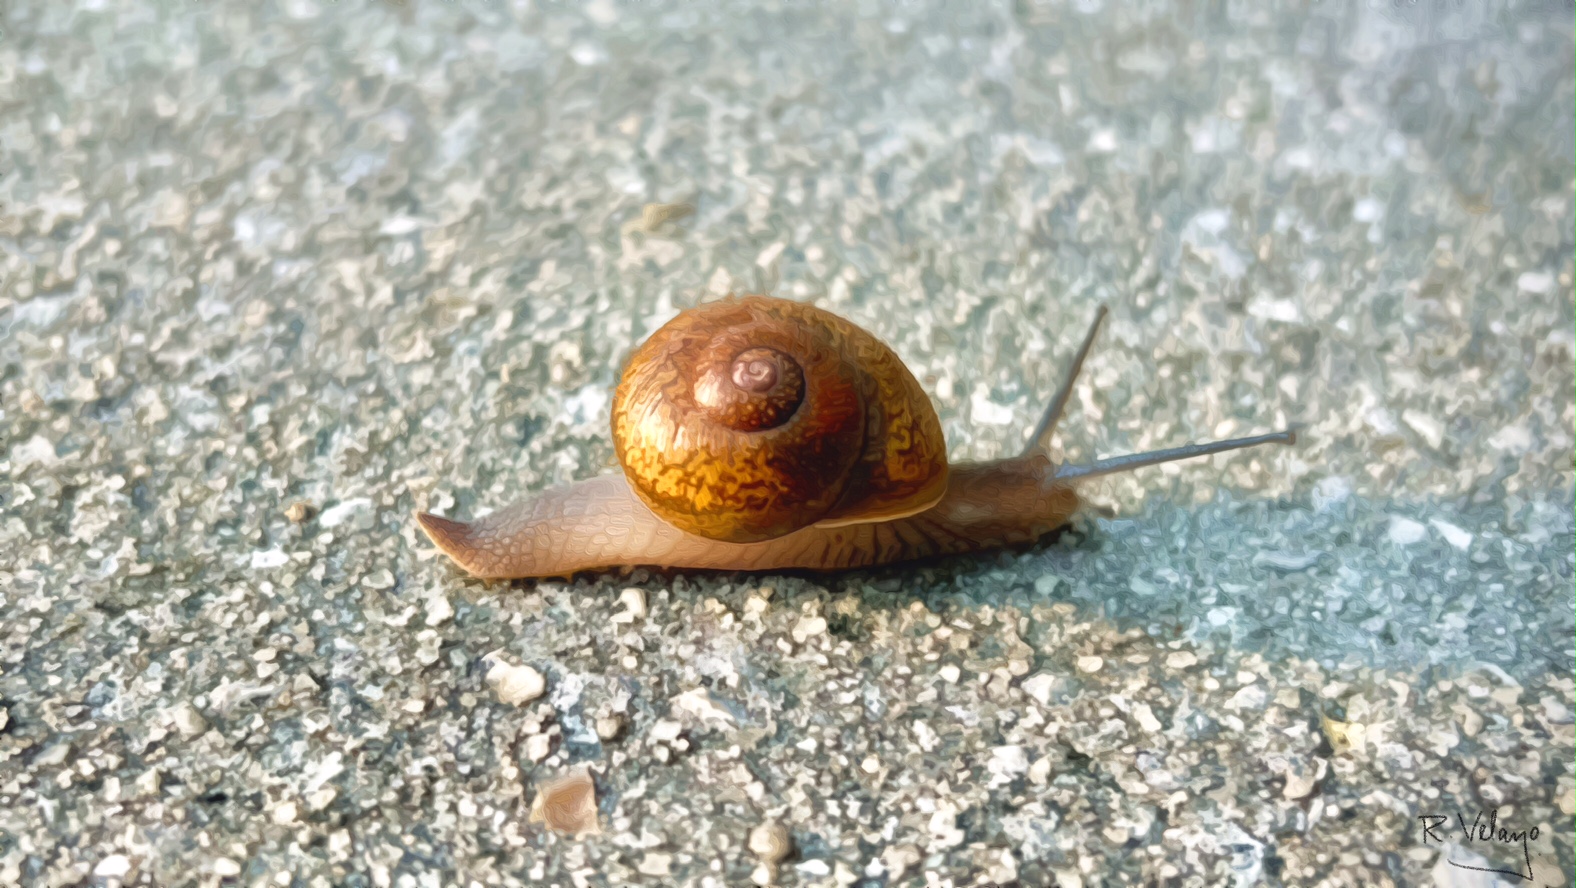 "A SNAIL’S EARLY MORNING CRAWL" [Created: 5/06/2022]